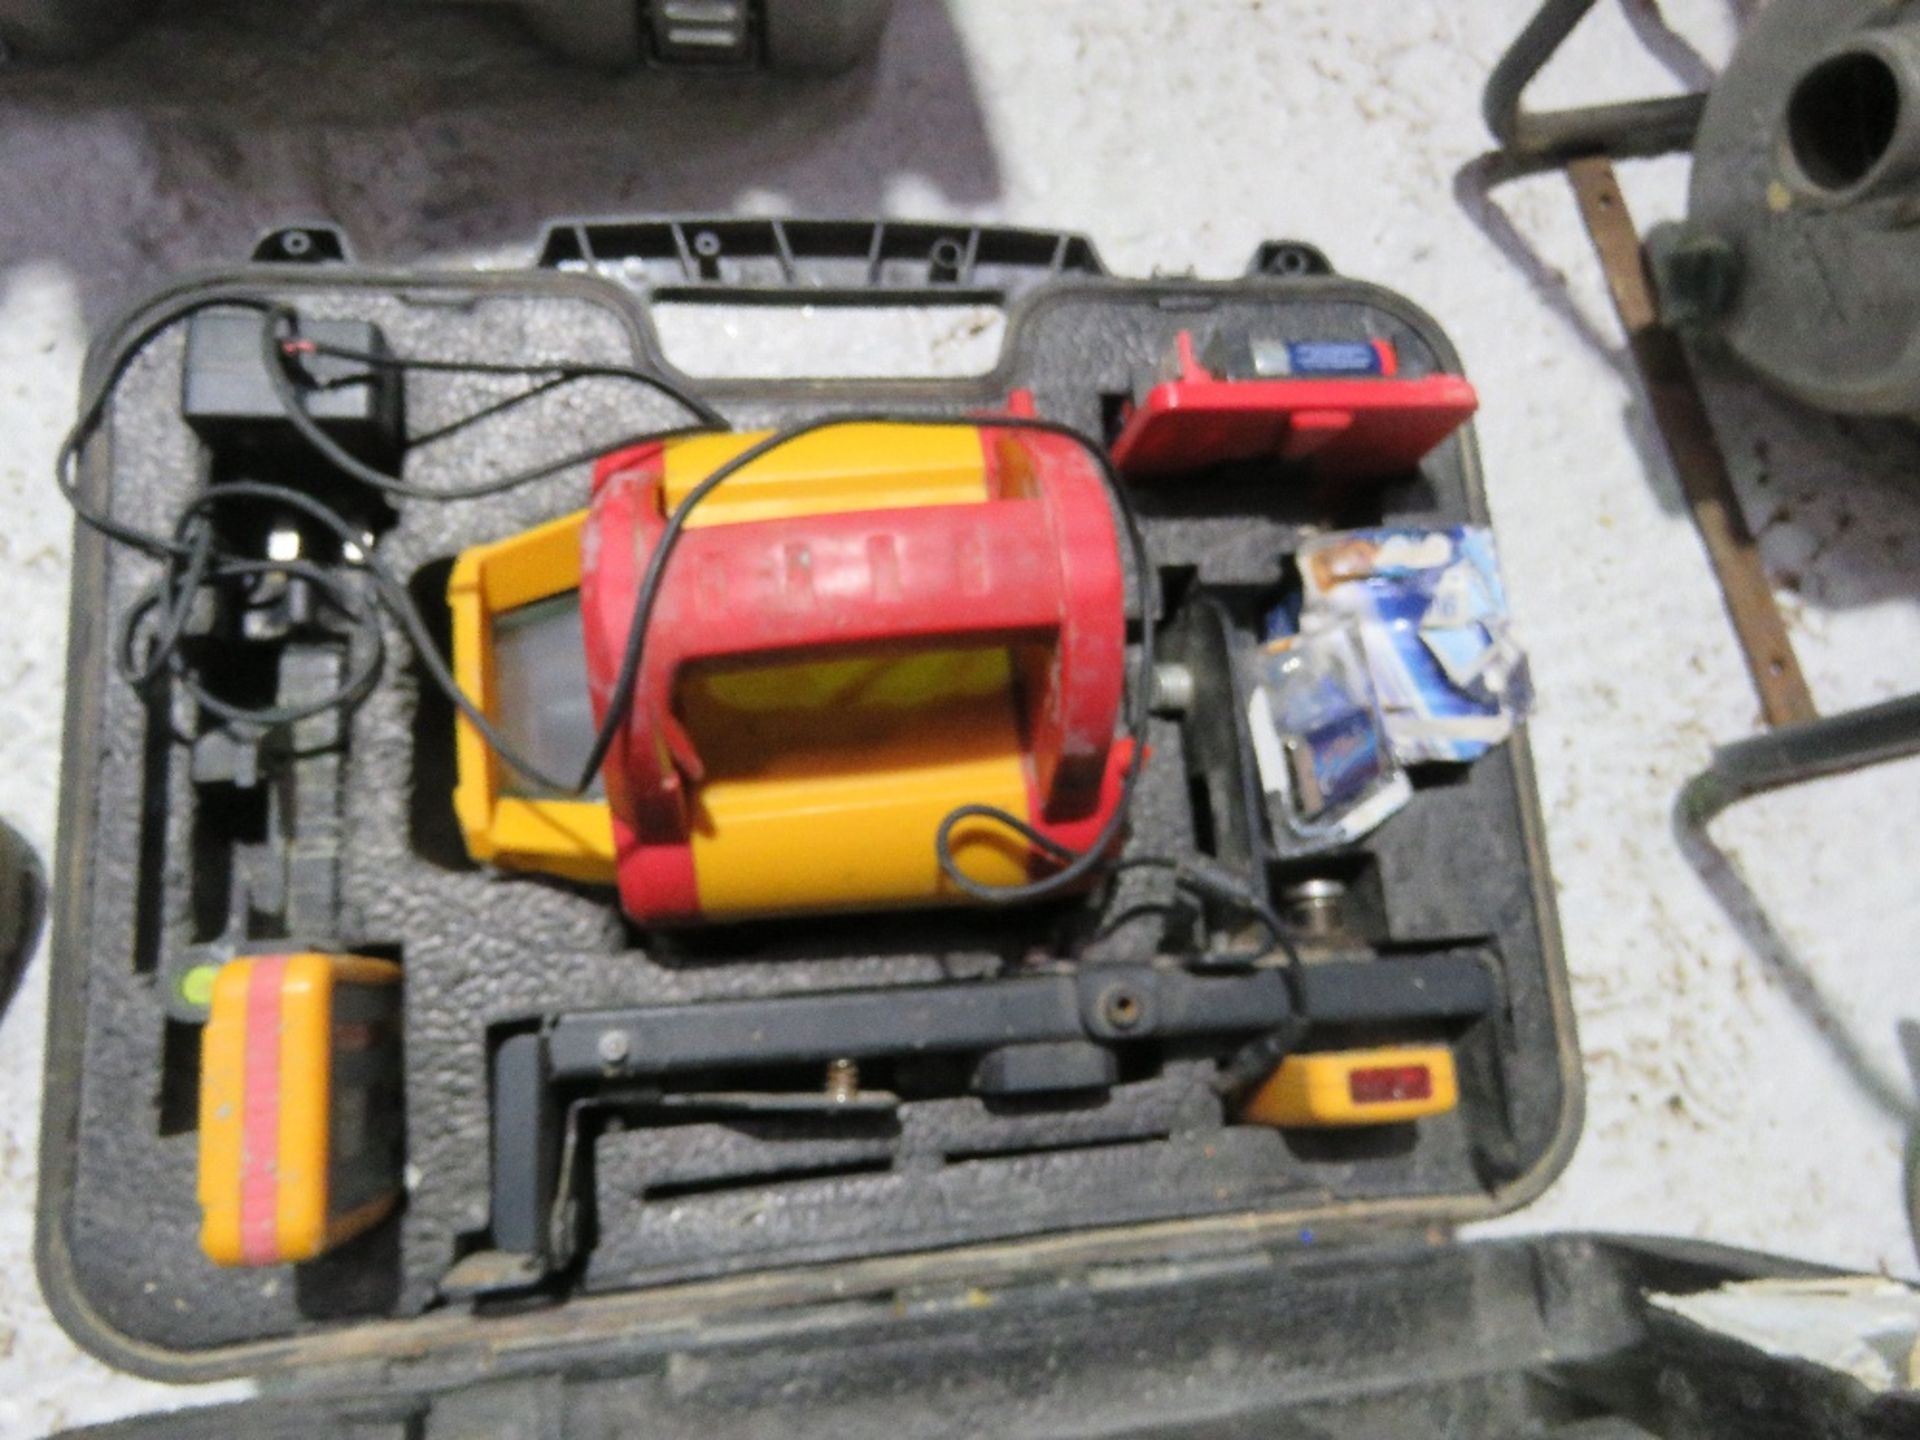 PLS HVR505R LASER LEVEL SET IN A CASE. DIRECT FROM LOCAL RETIRING BUILDER. THIS LOT IS SOLD UND